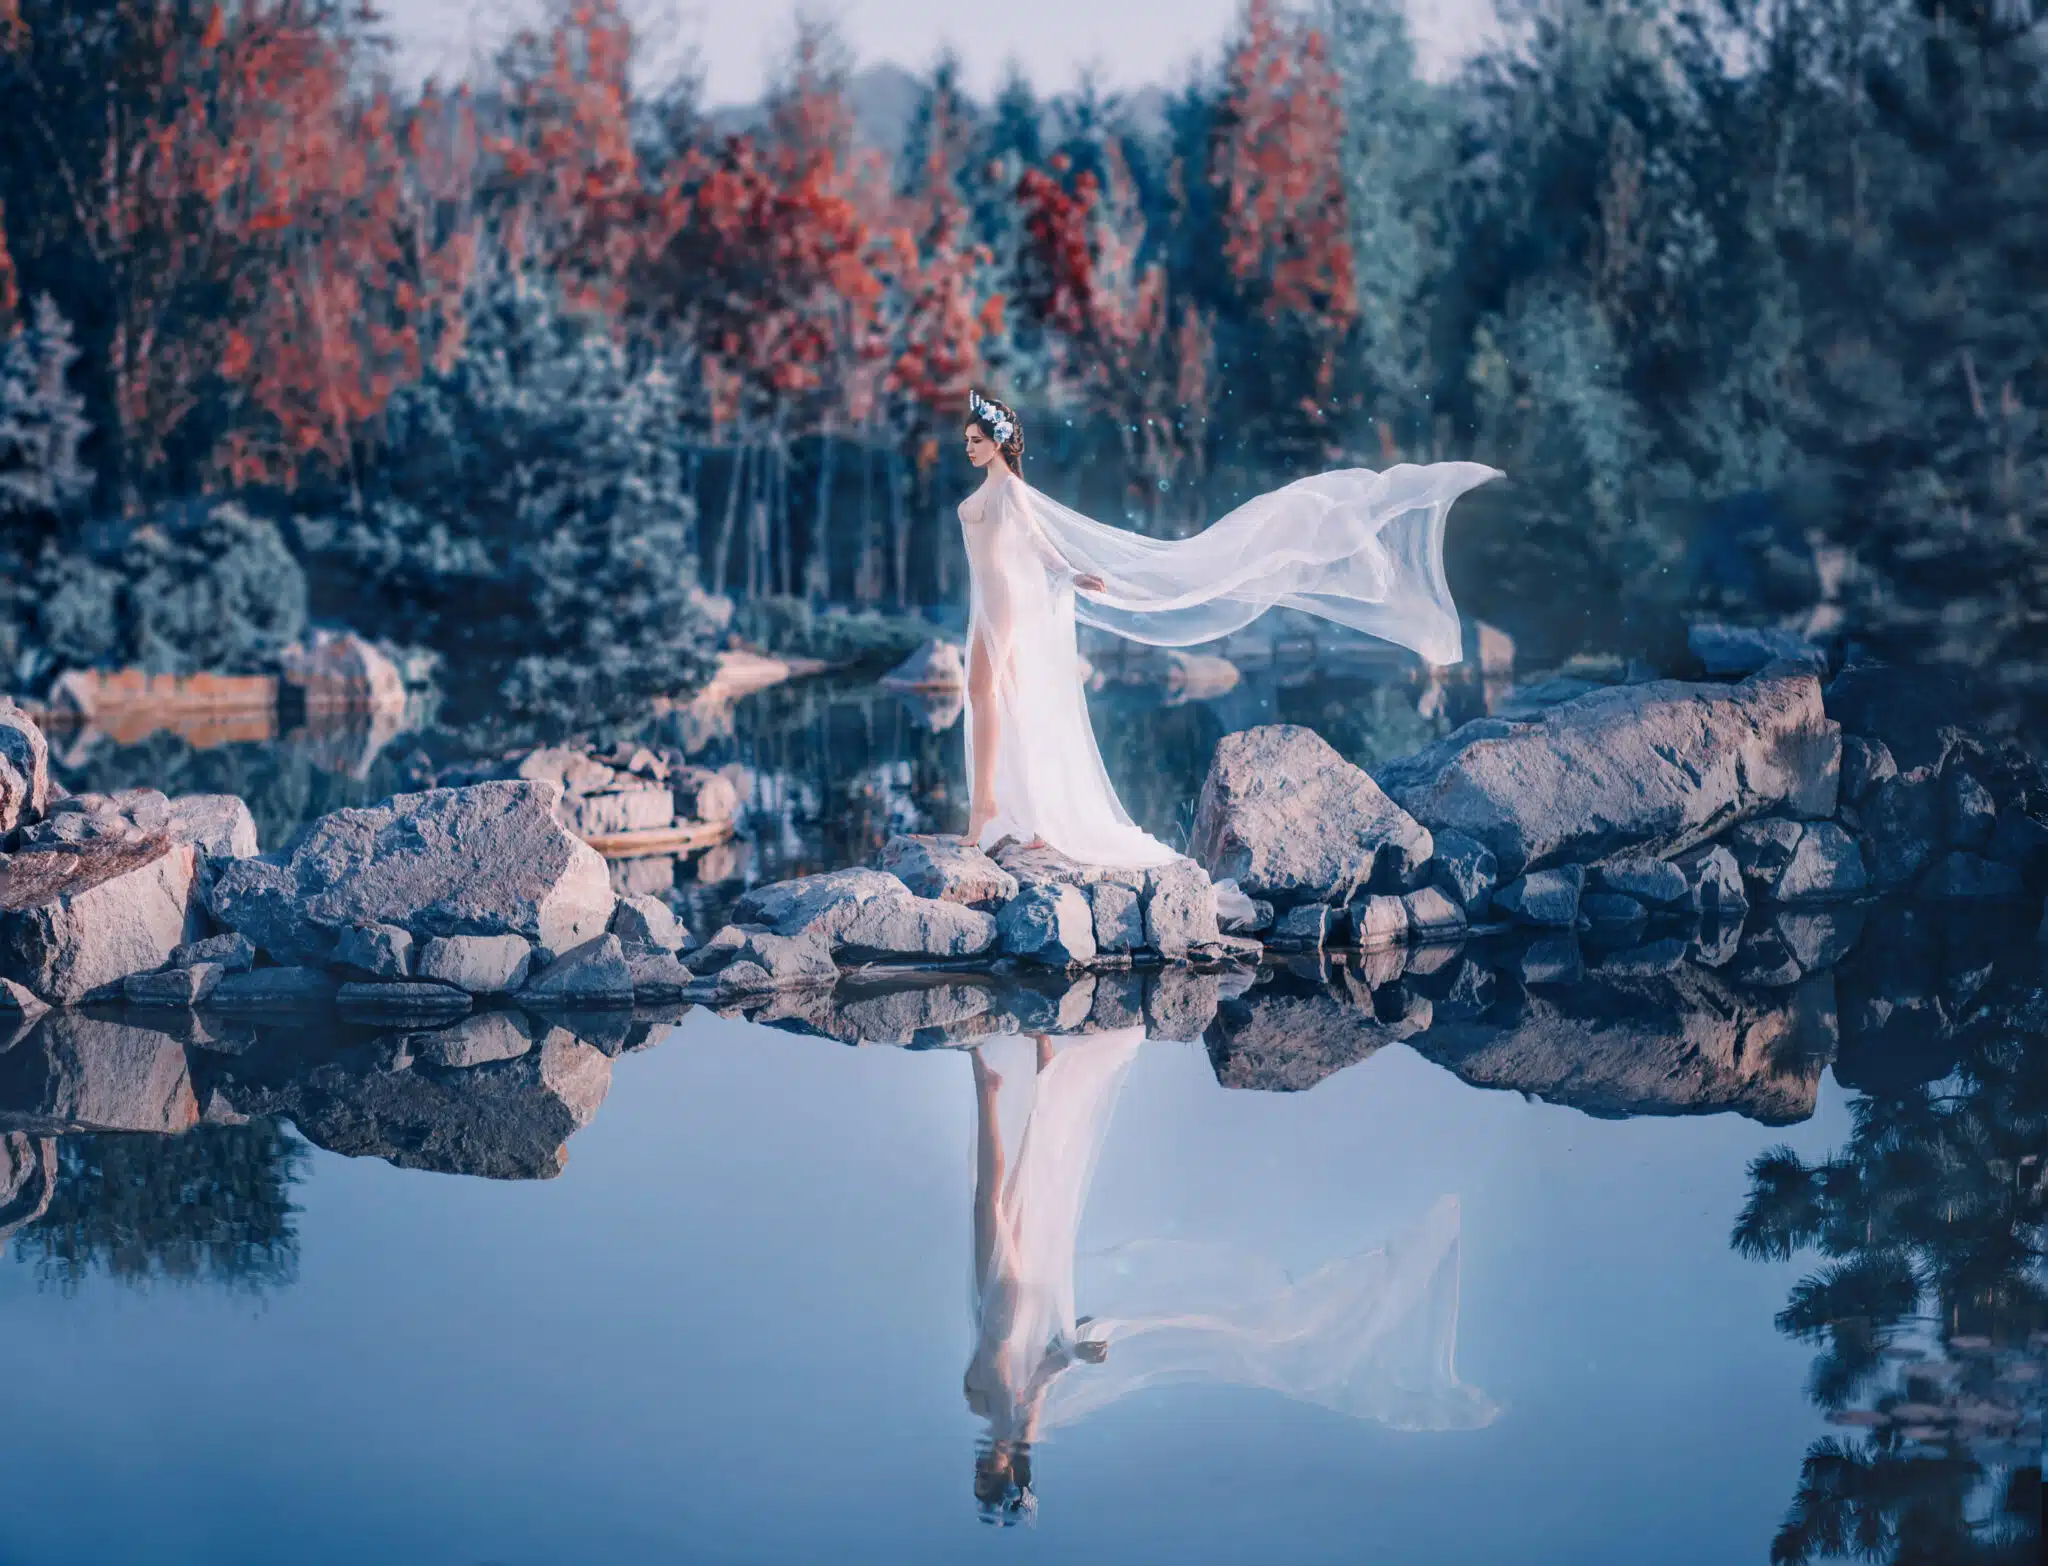 River nymph walks against the backdrop of mountains and wild forests, her reflection in the water